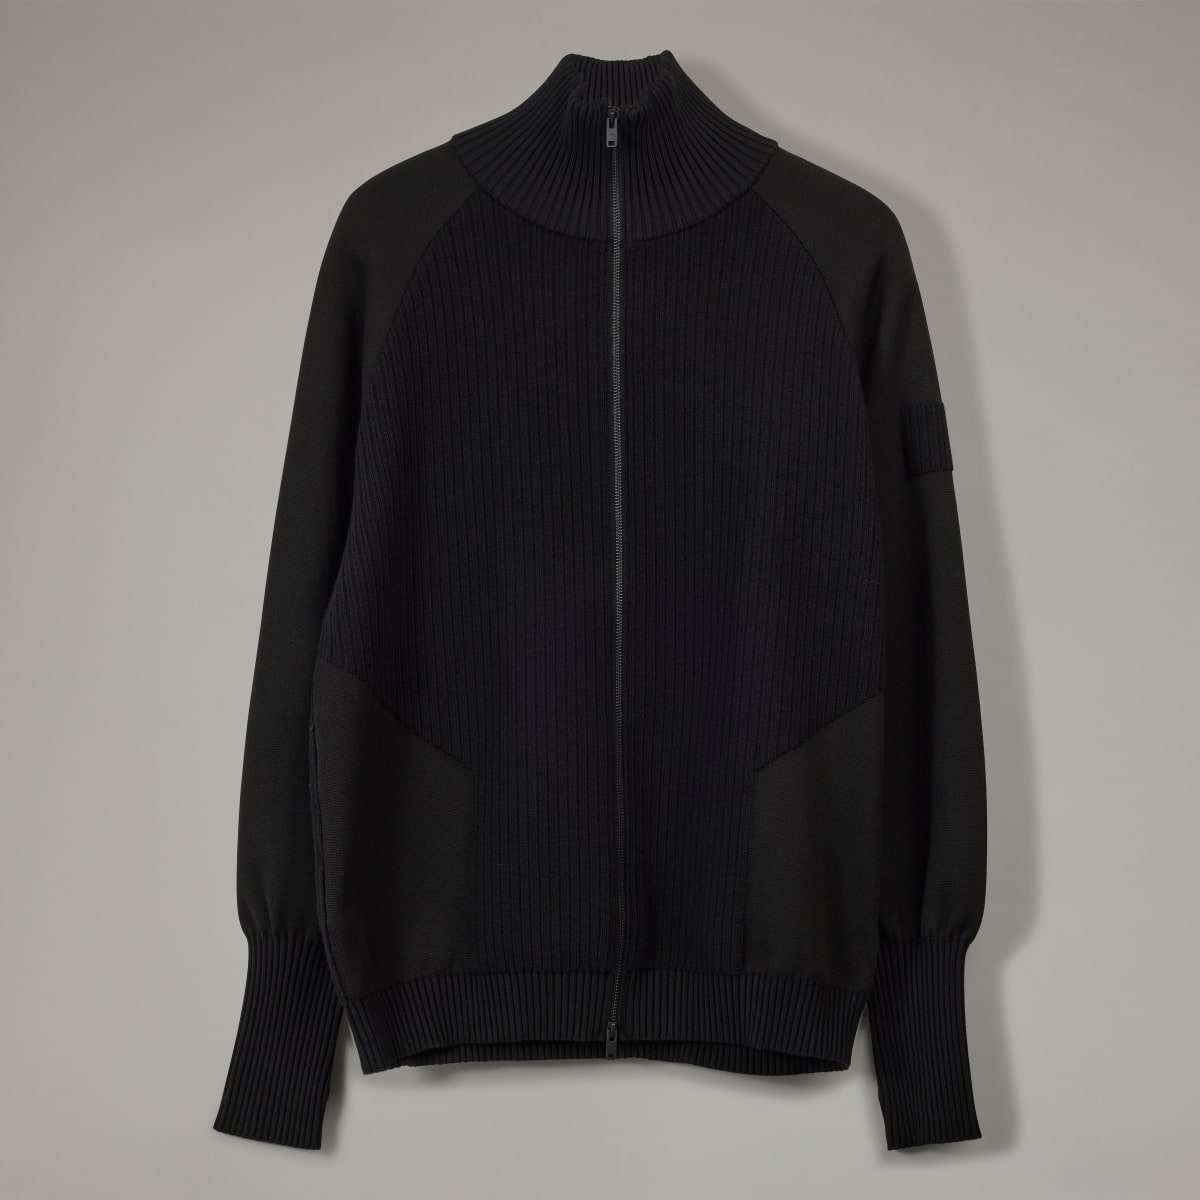 Adidas Y-3 Funnel-Neck Knit Sweater. 5